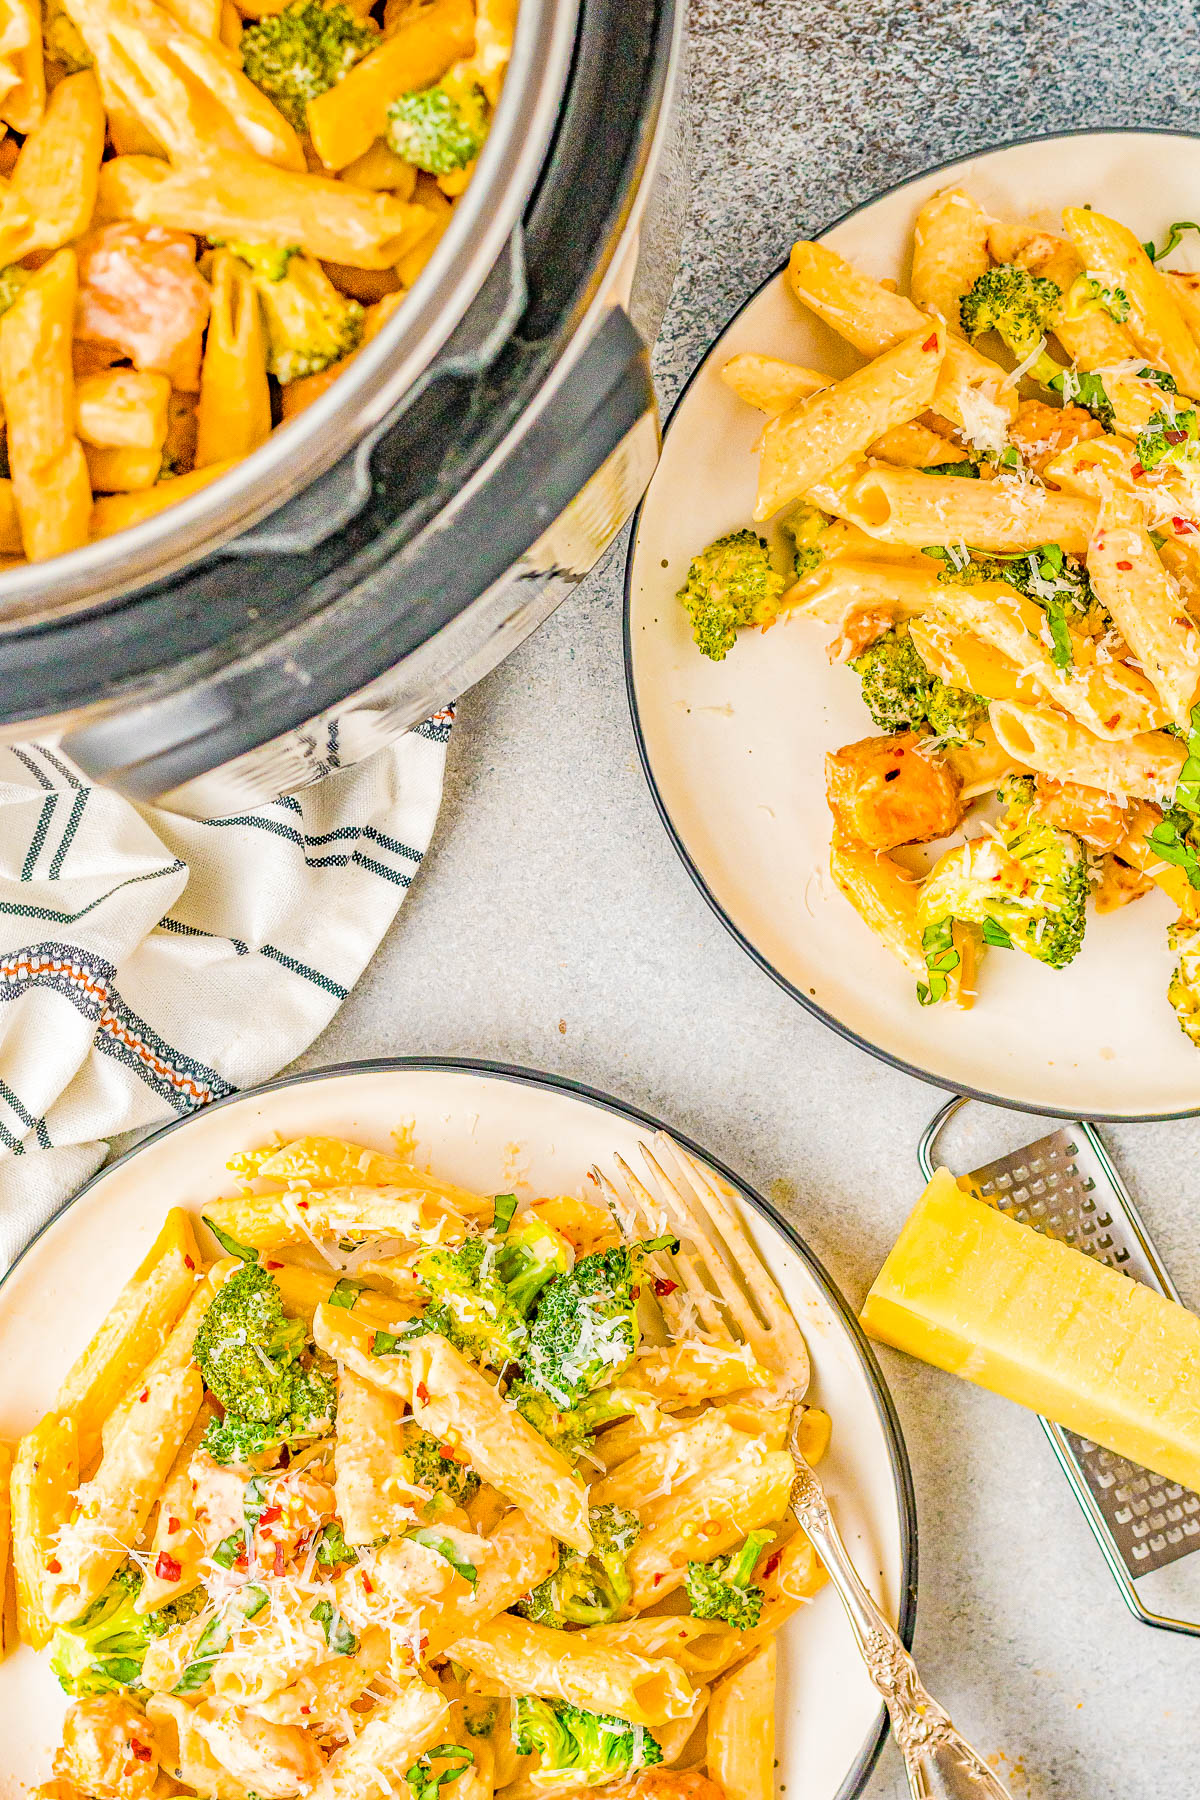 Instant Pot Chicken Broccoli Pasta - Juicy seasoned chicken with pasta and broccoli, all tossed in an AMAZING creamy cheese sauce! A family favorite EASY dinner recipe that's perfect for busy weeknights! Made in the Instant Pot in 30 minutes and stovetop cooking directions are also provided.